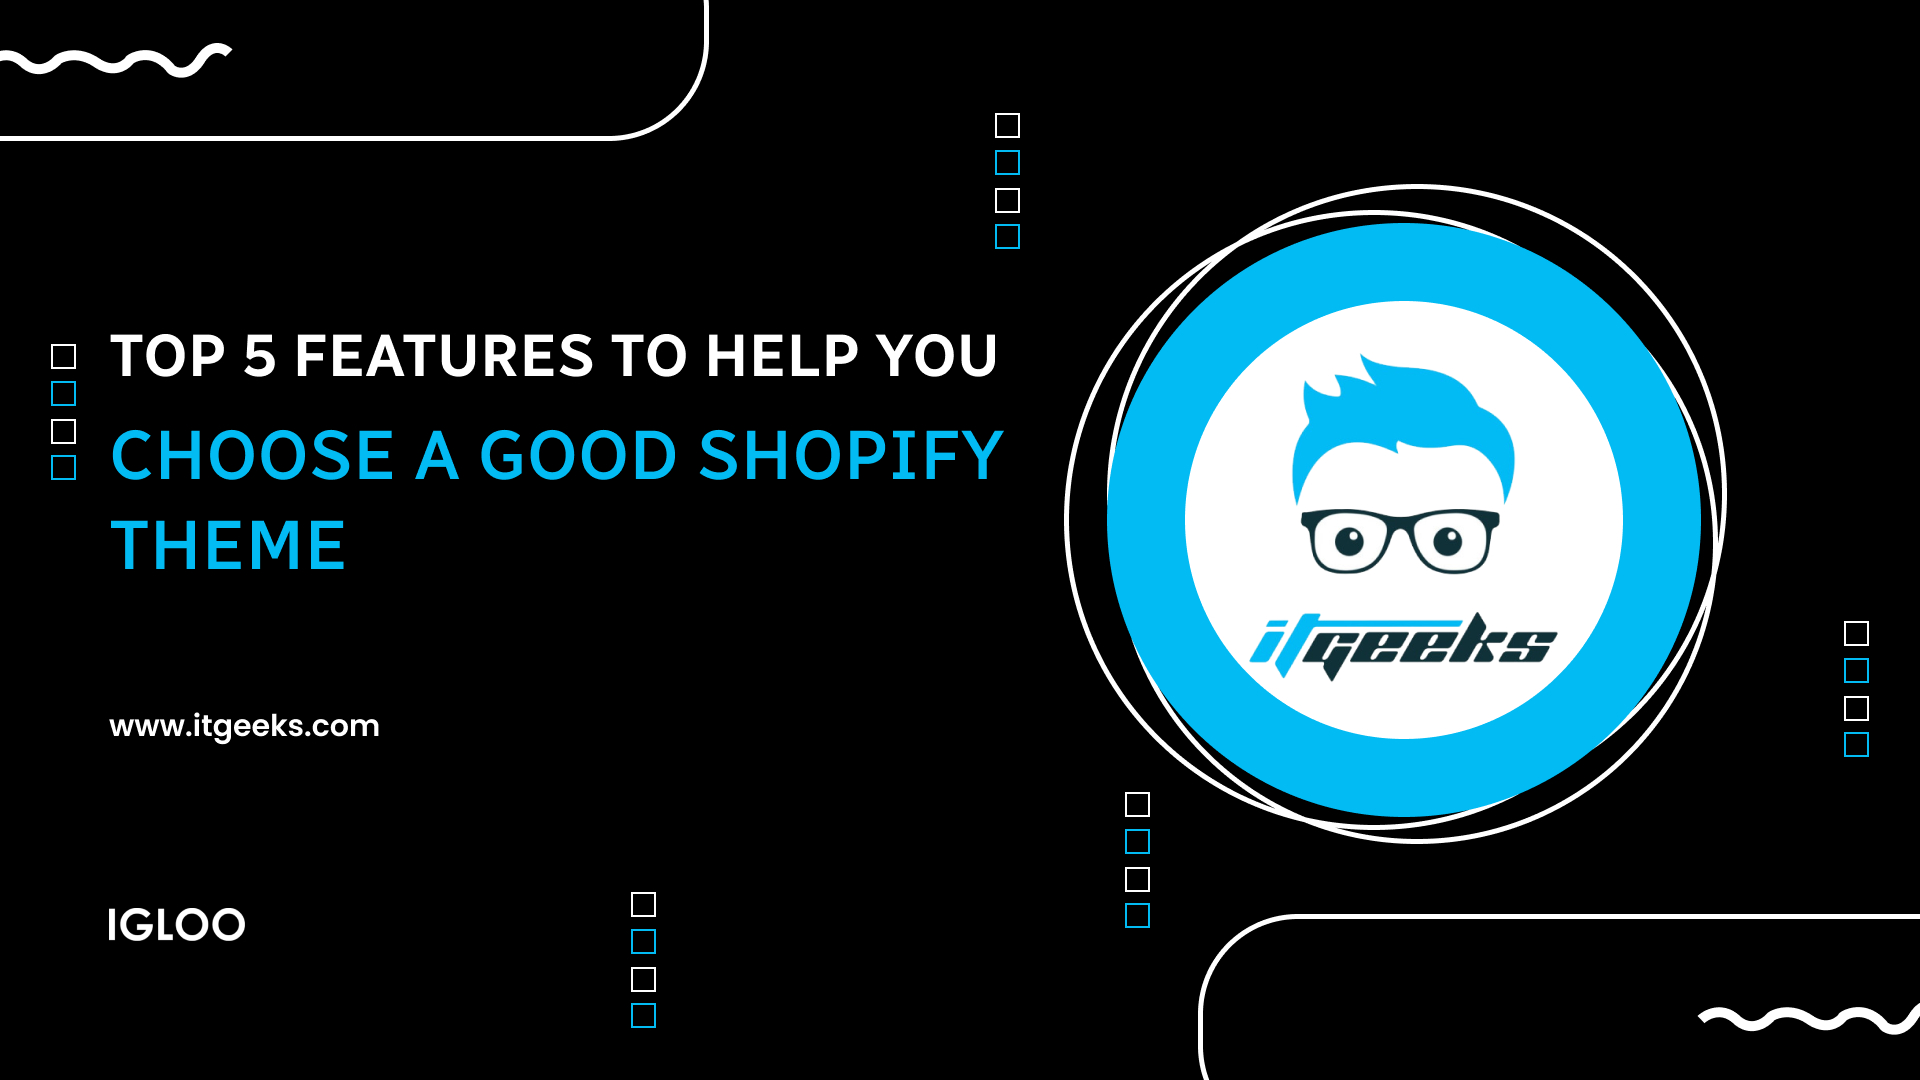 Top 5 features to help you choose a good Shopify theme.